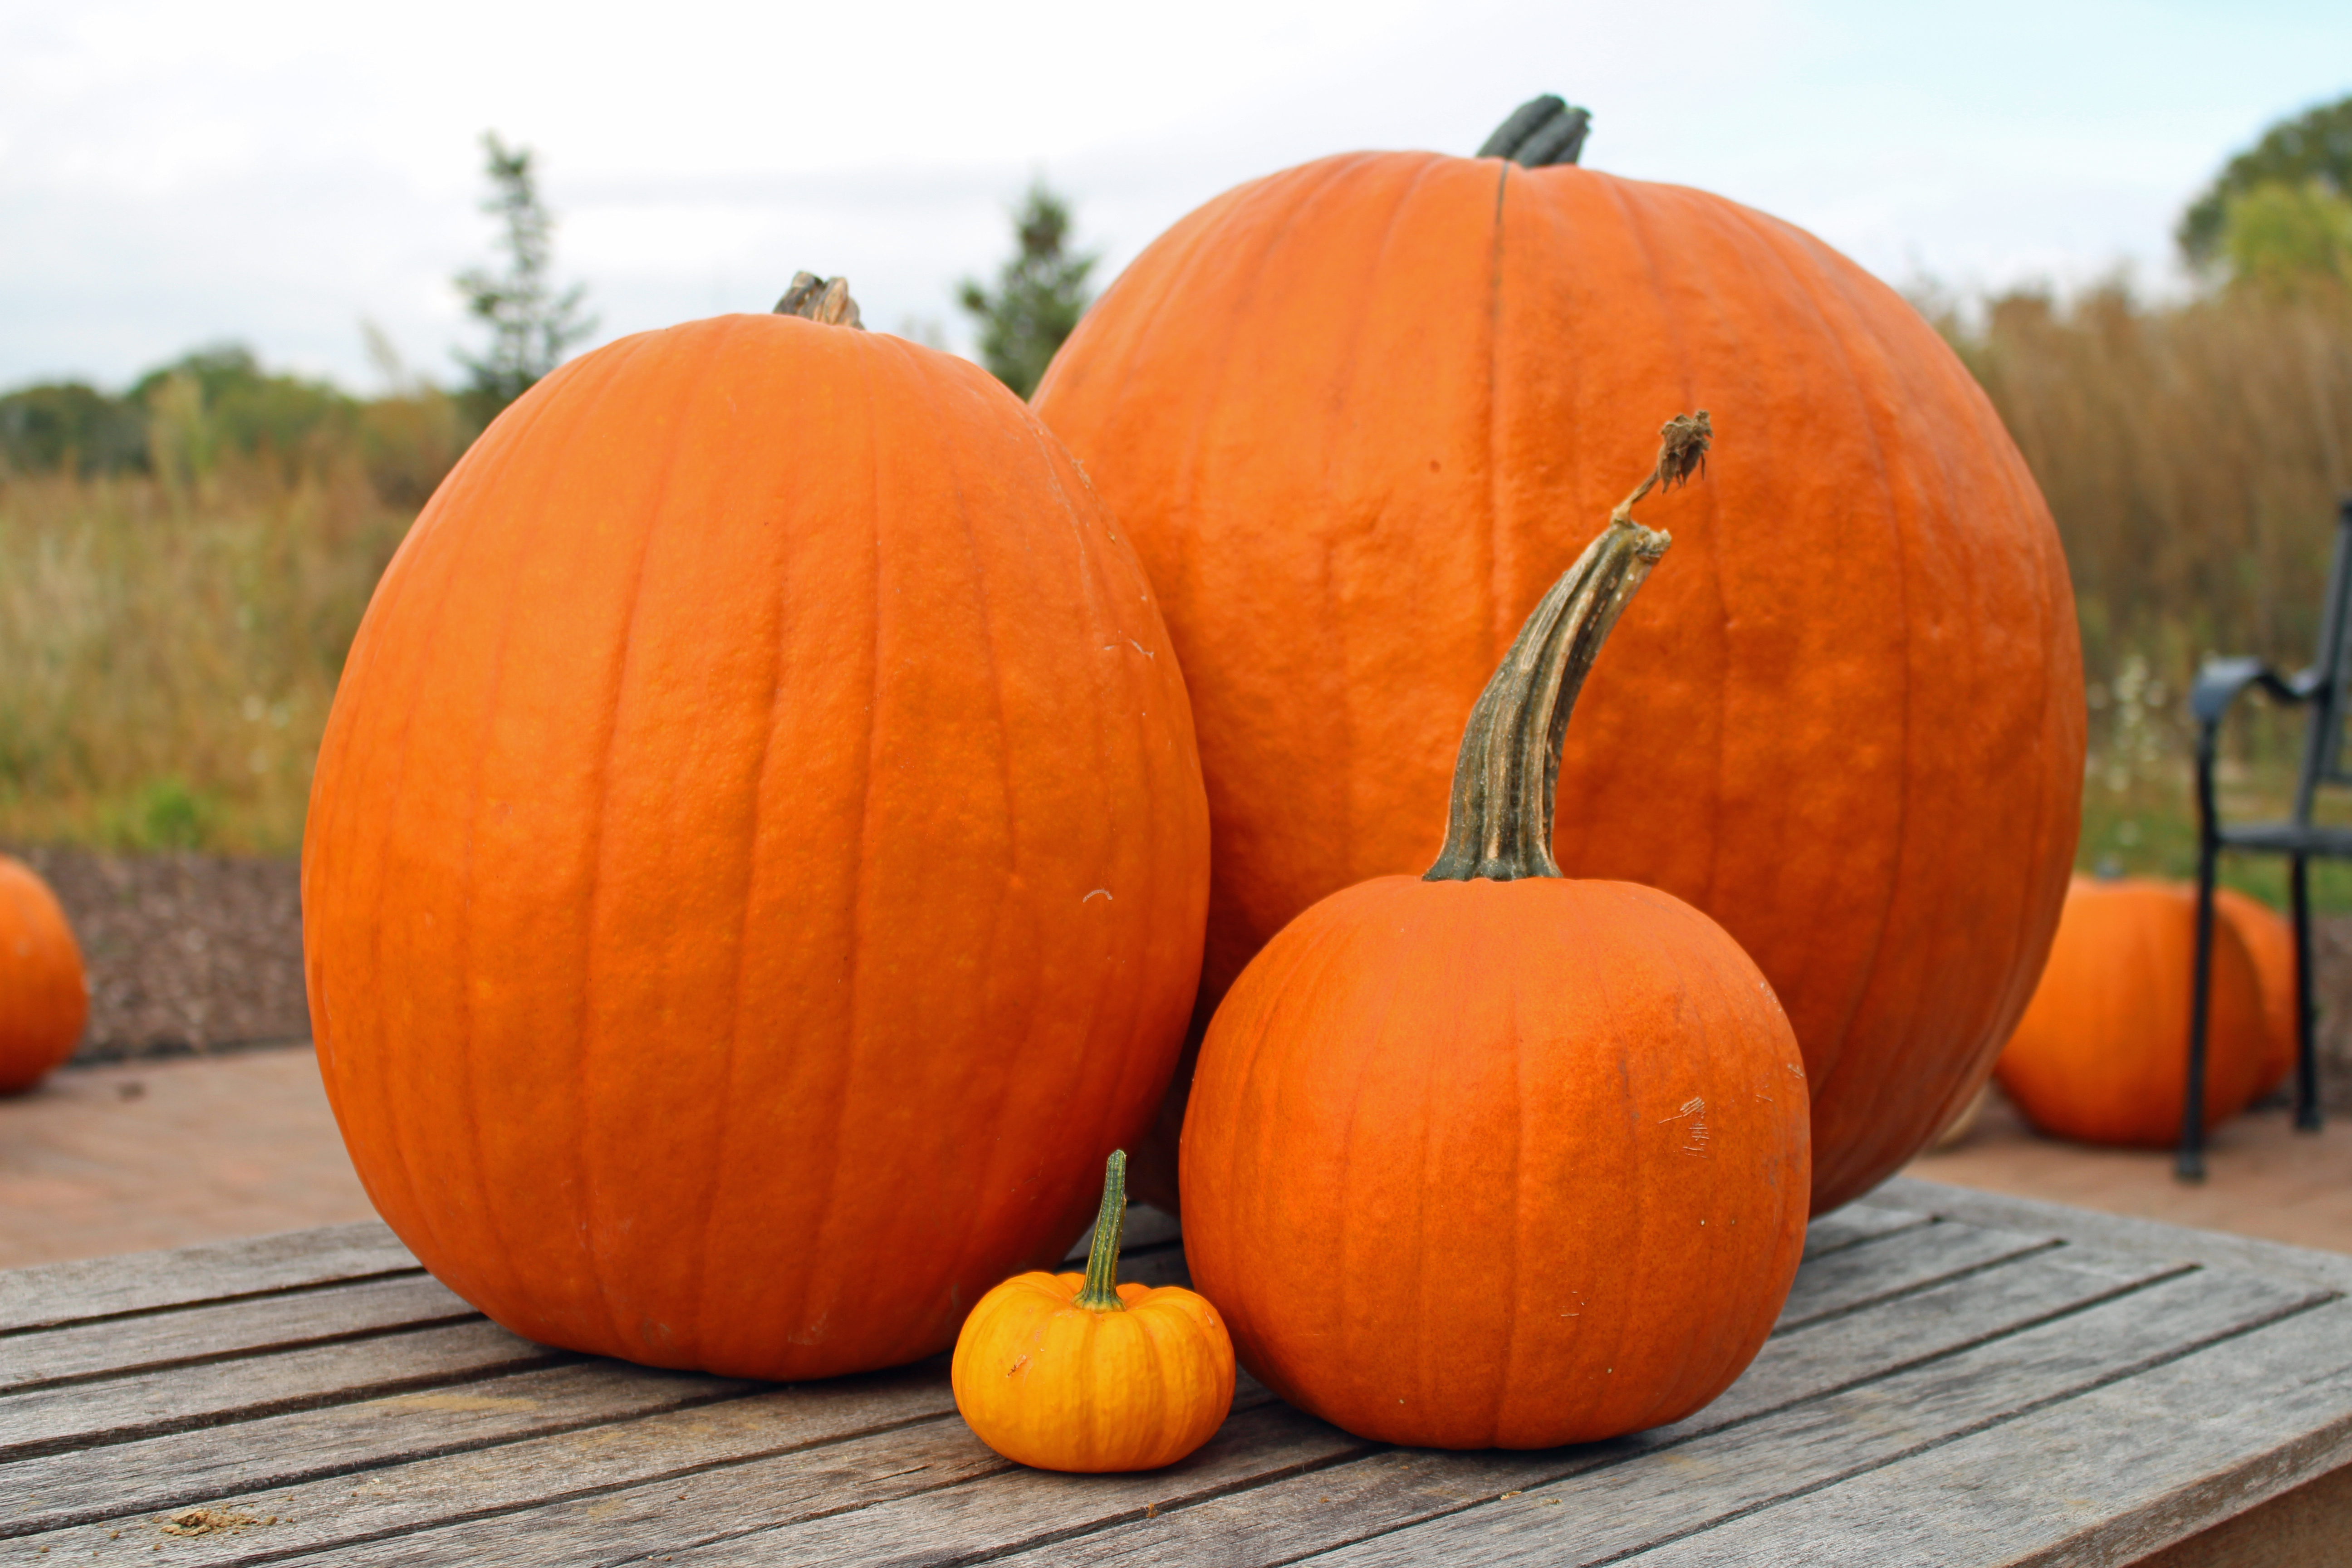 Over 15 Varieties of Pumpkins for Sale in 2017 at Abbey Farms